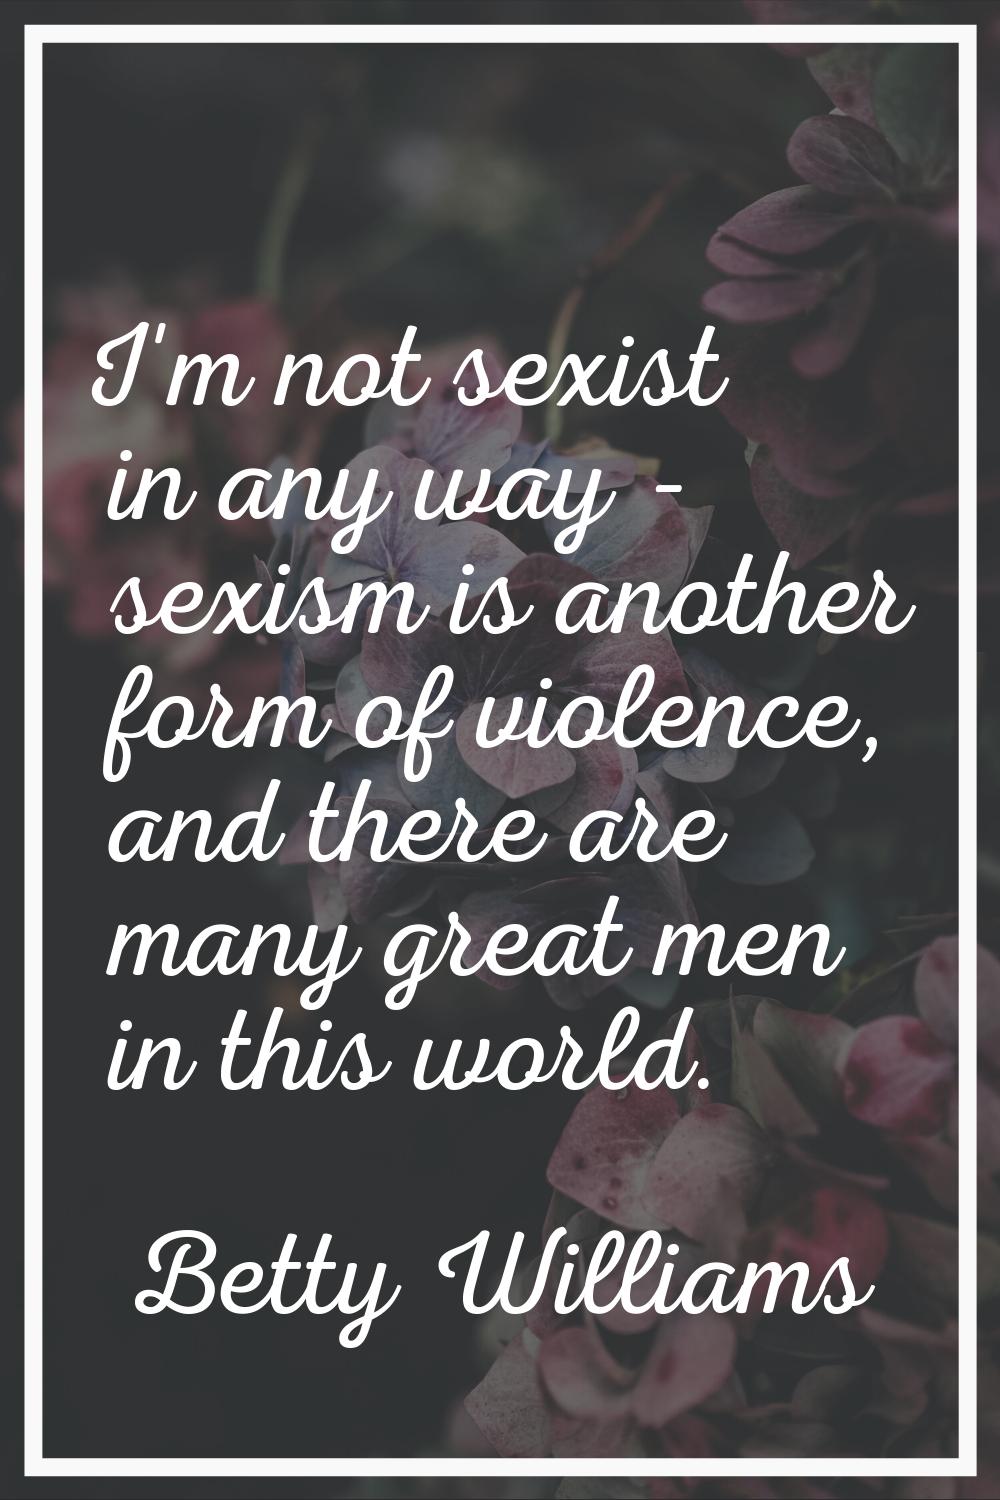 I'm not sexist in any way - sexism is another form of violence, and there are many great men in thi